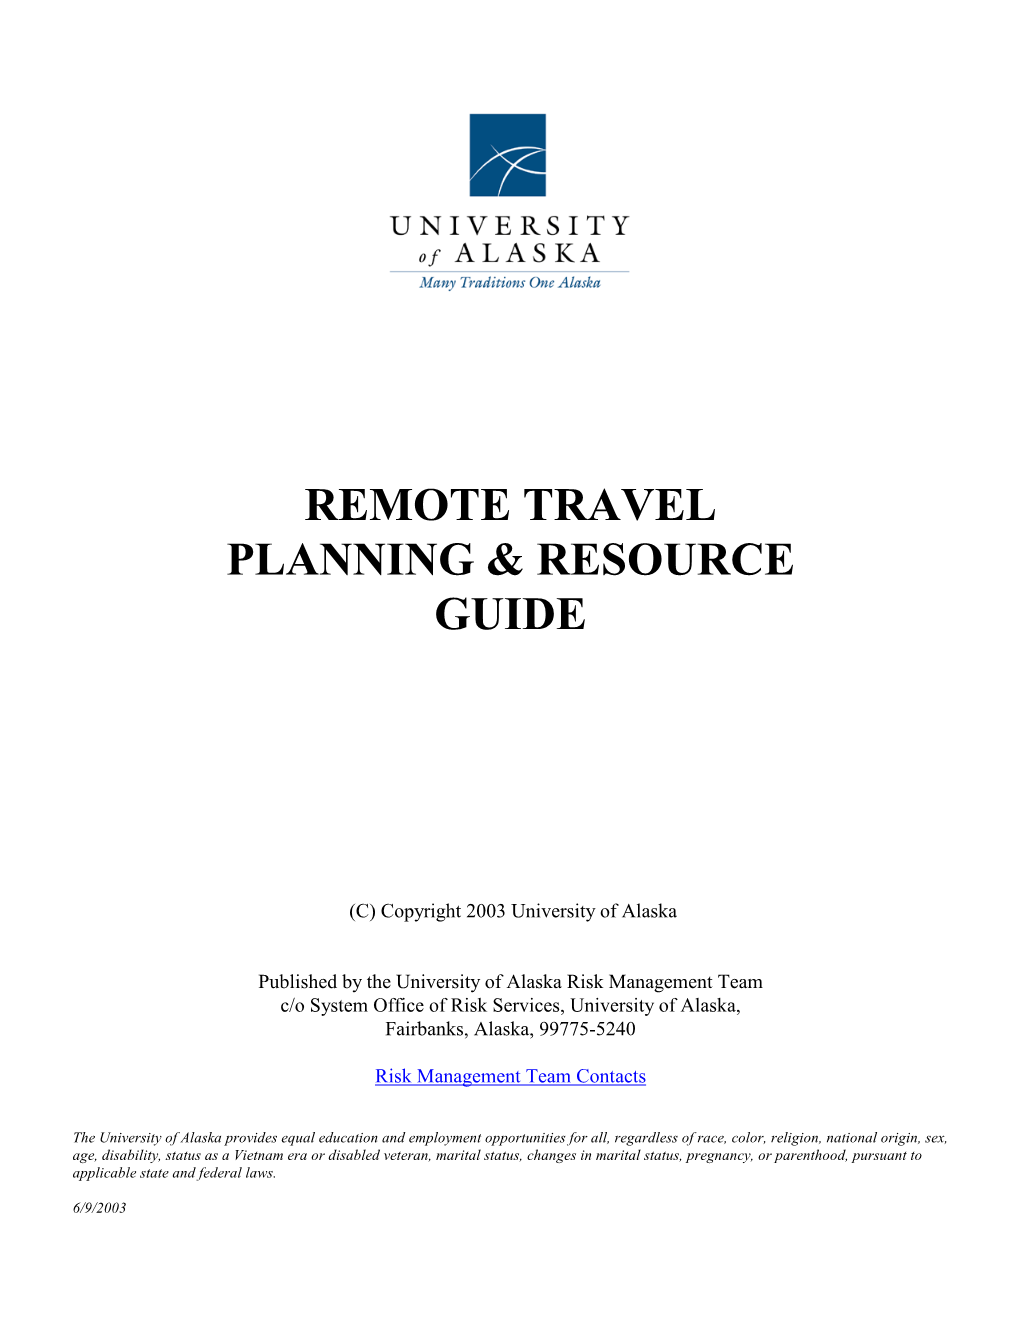 University of Alaska Remote Travel Planning and Resource Guide